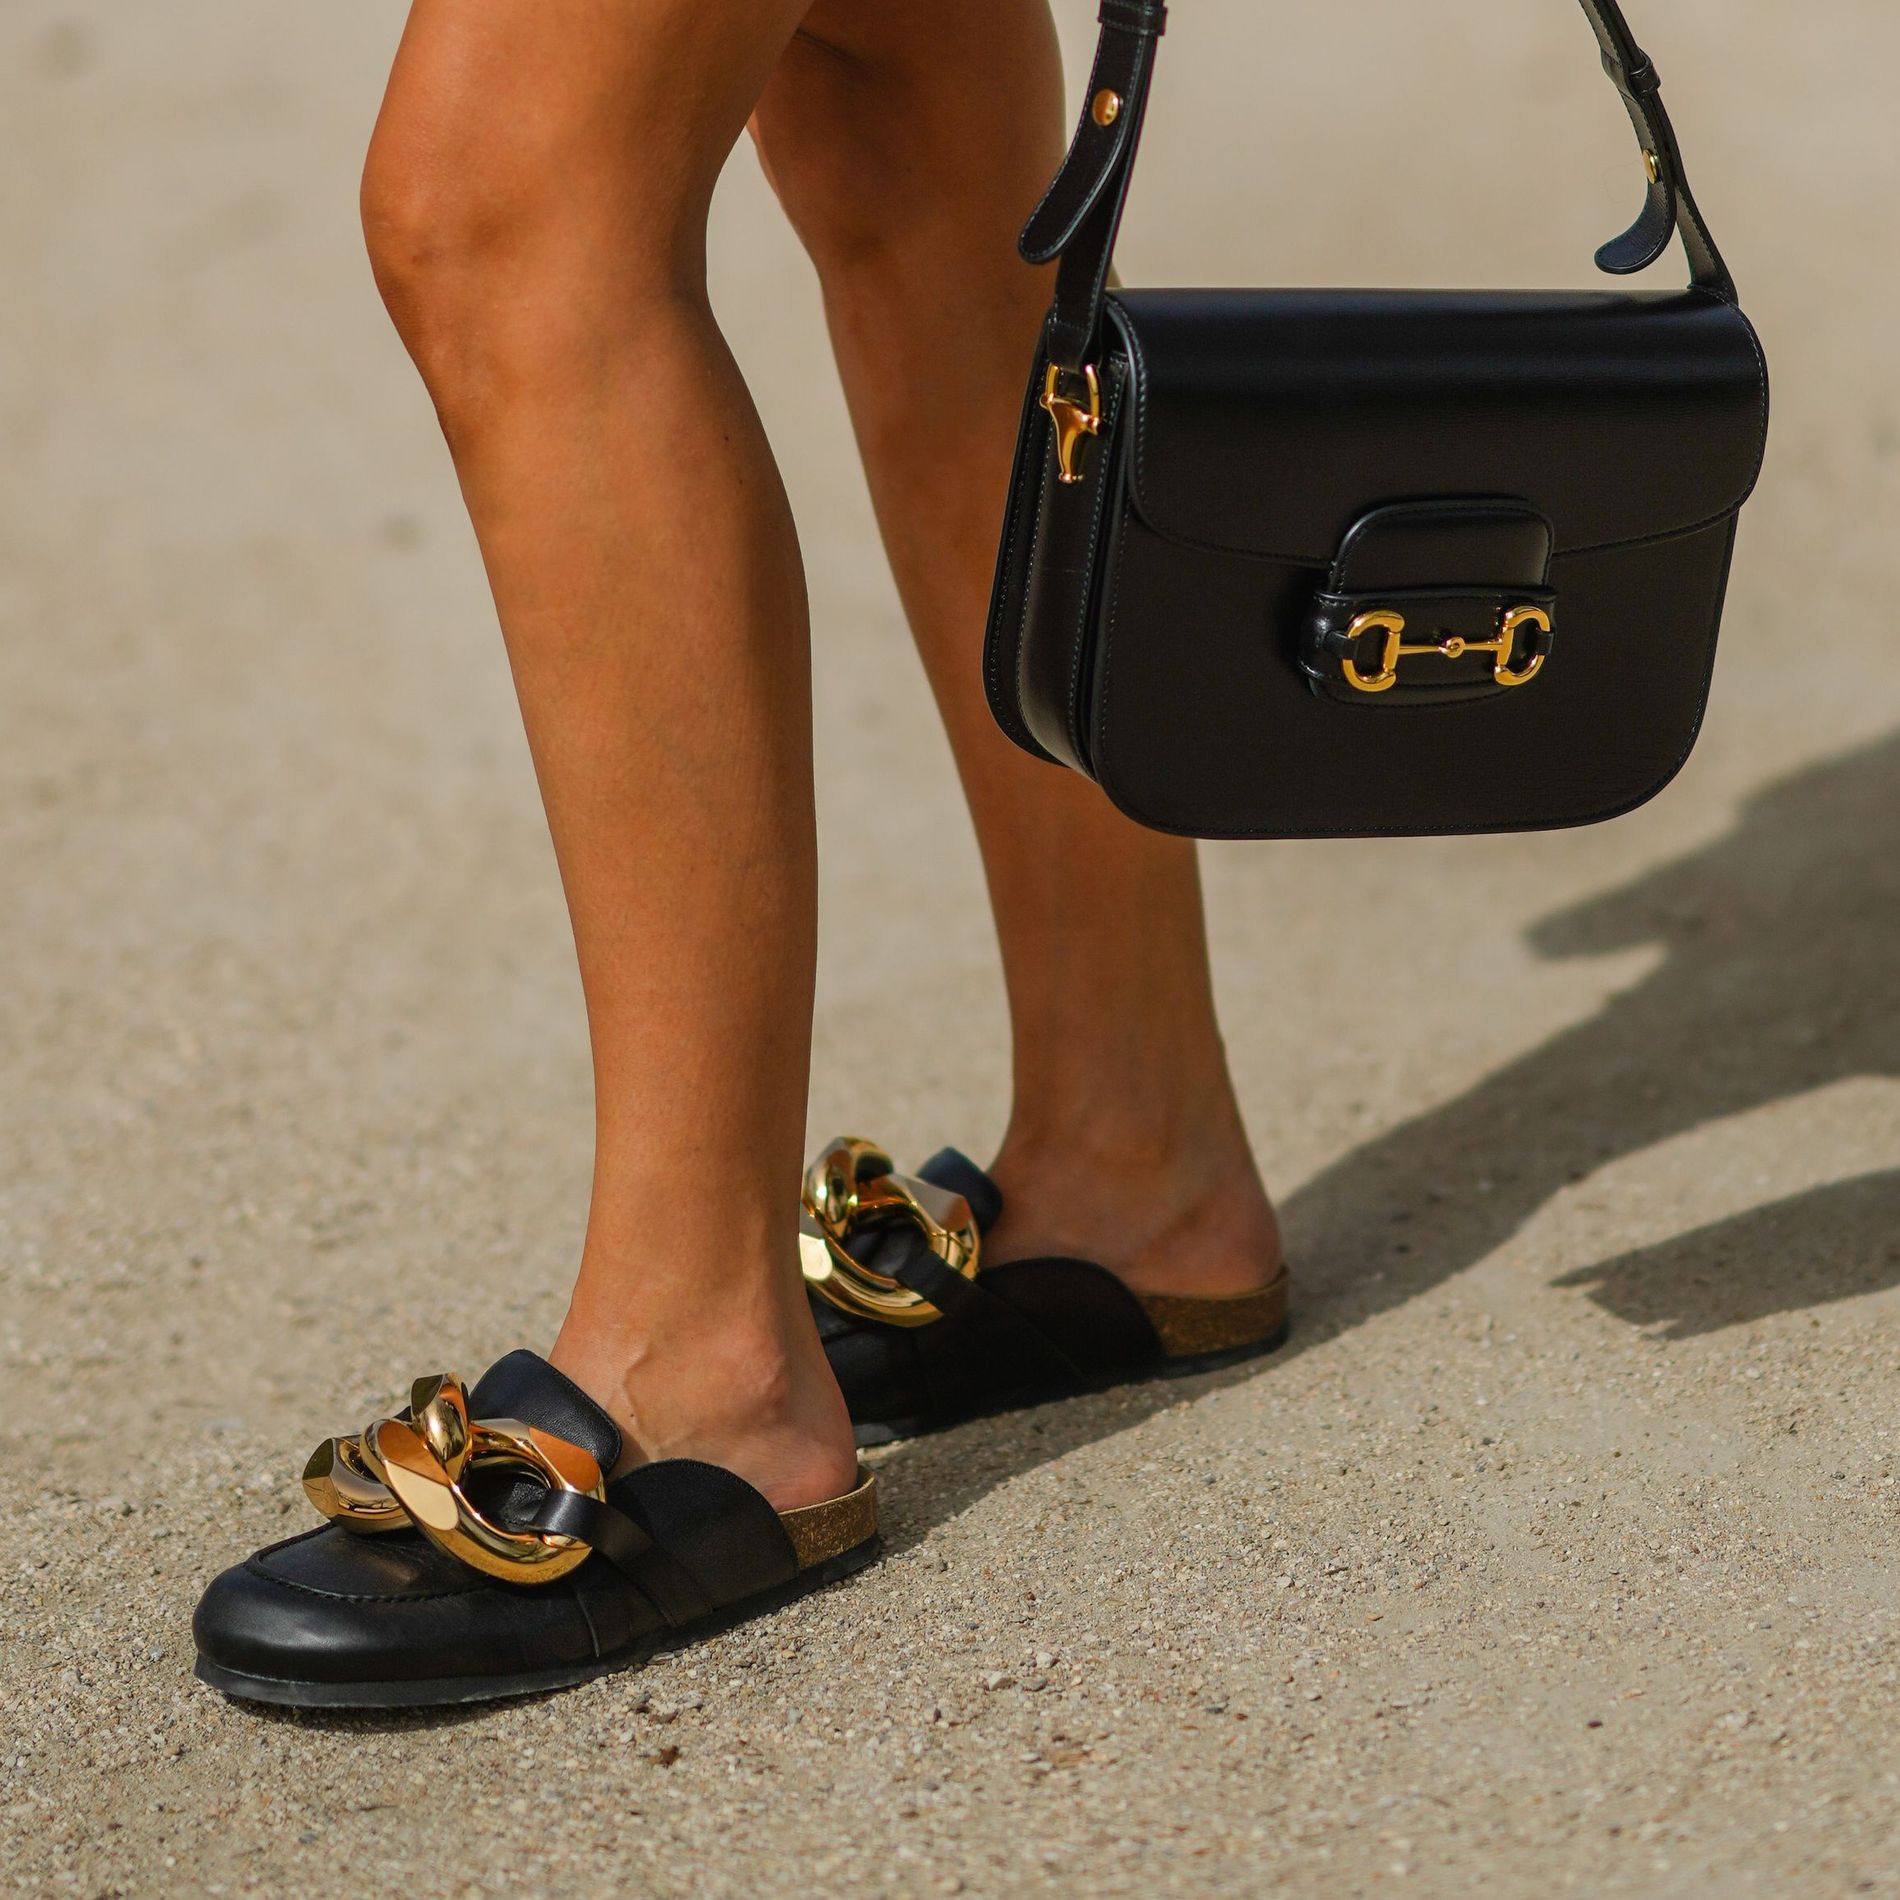 black leather Gucci bag, black leather sandals / shoes with golden inserts from JW Anderson